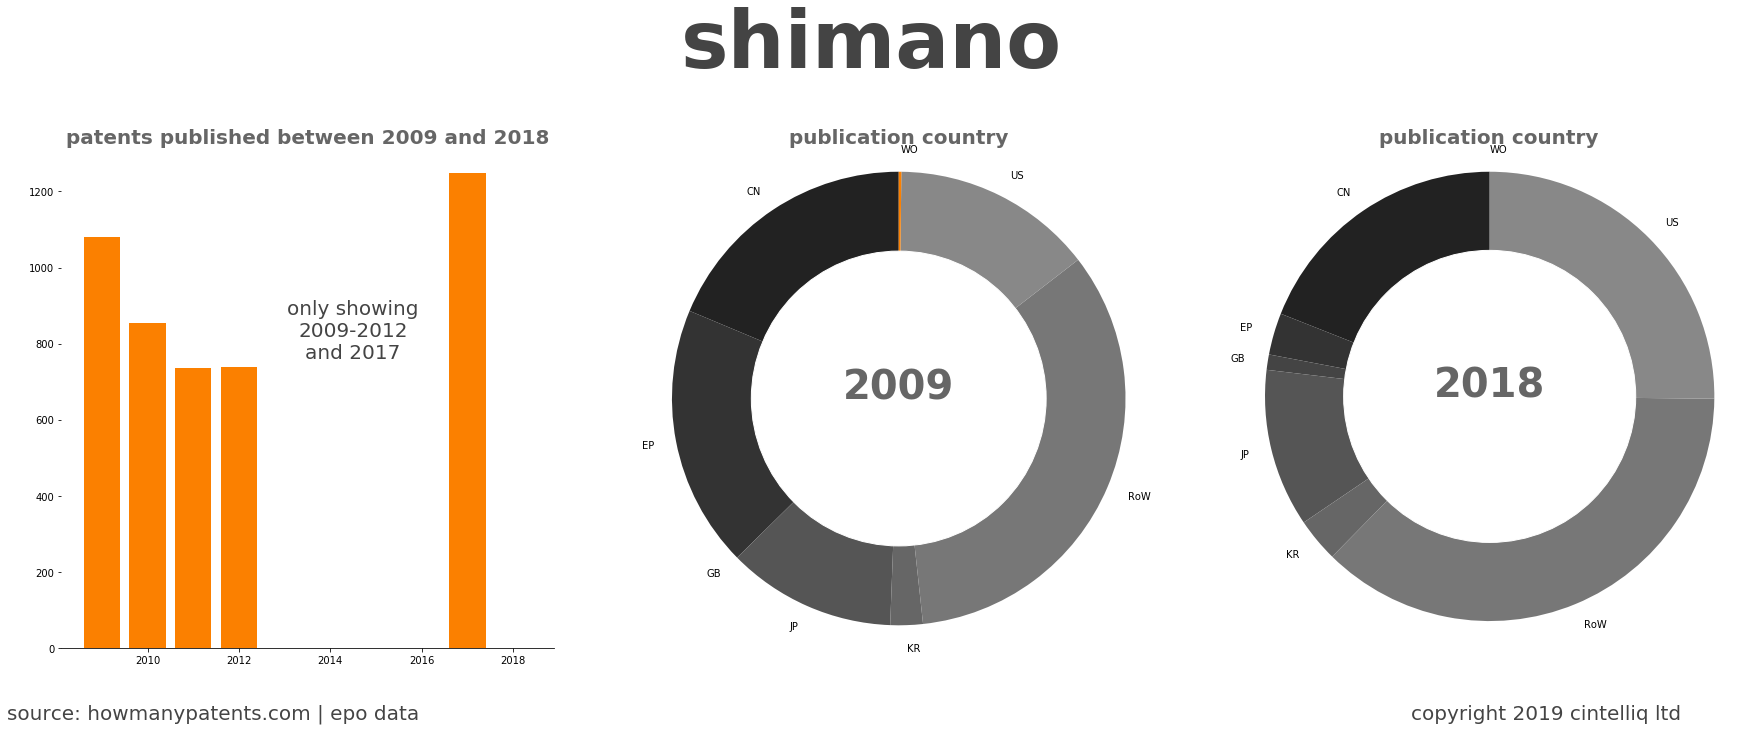 summary of patents for Shimano